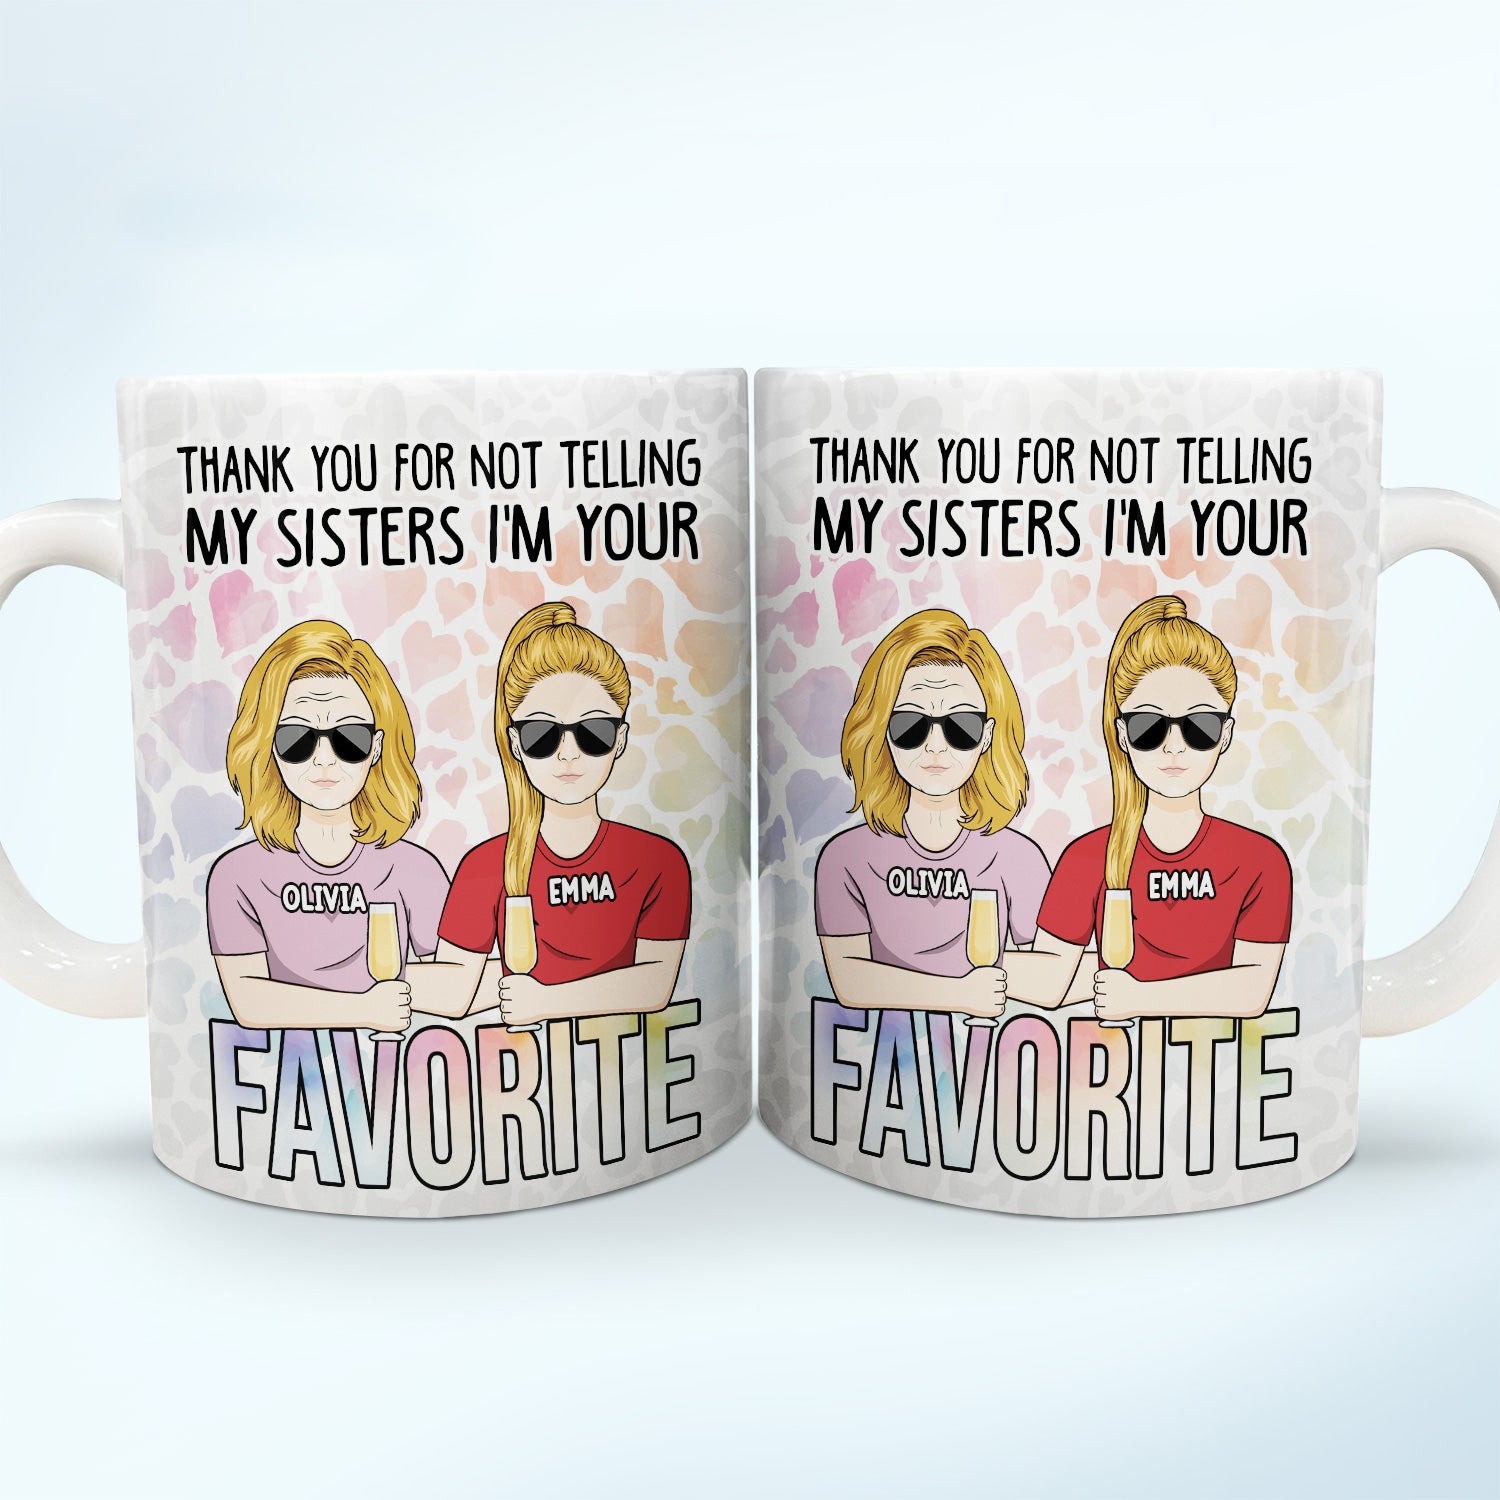 Thank You For Not Telling - Gift For Mom - Personalized White Edge-to-Edge Mug